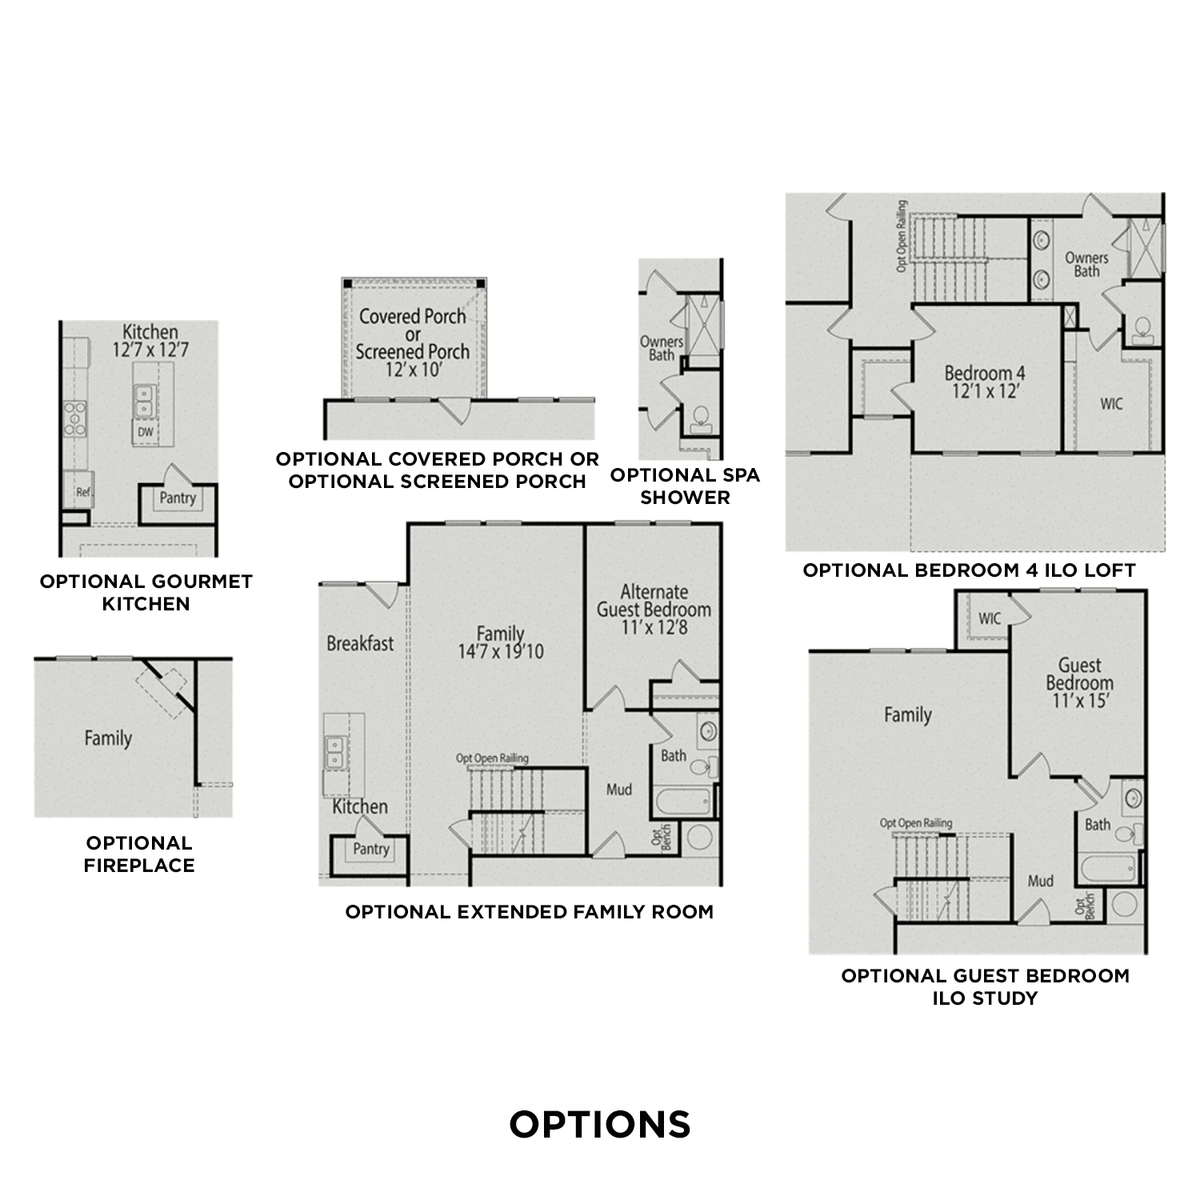 3 - The Willow D floor plan layout for 99 Wild Turkey Way in Davidson Homes' Wellers Knoll community.